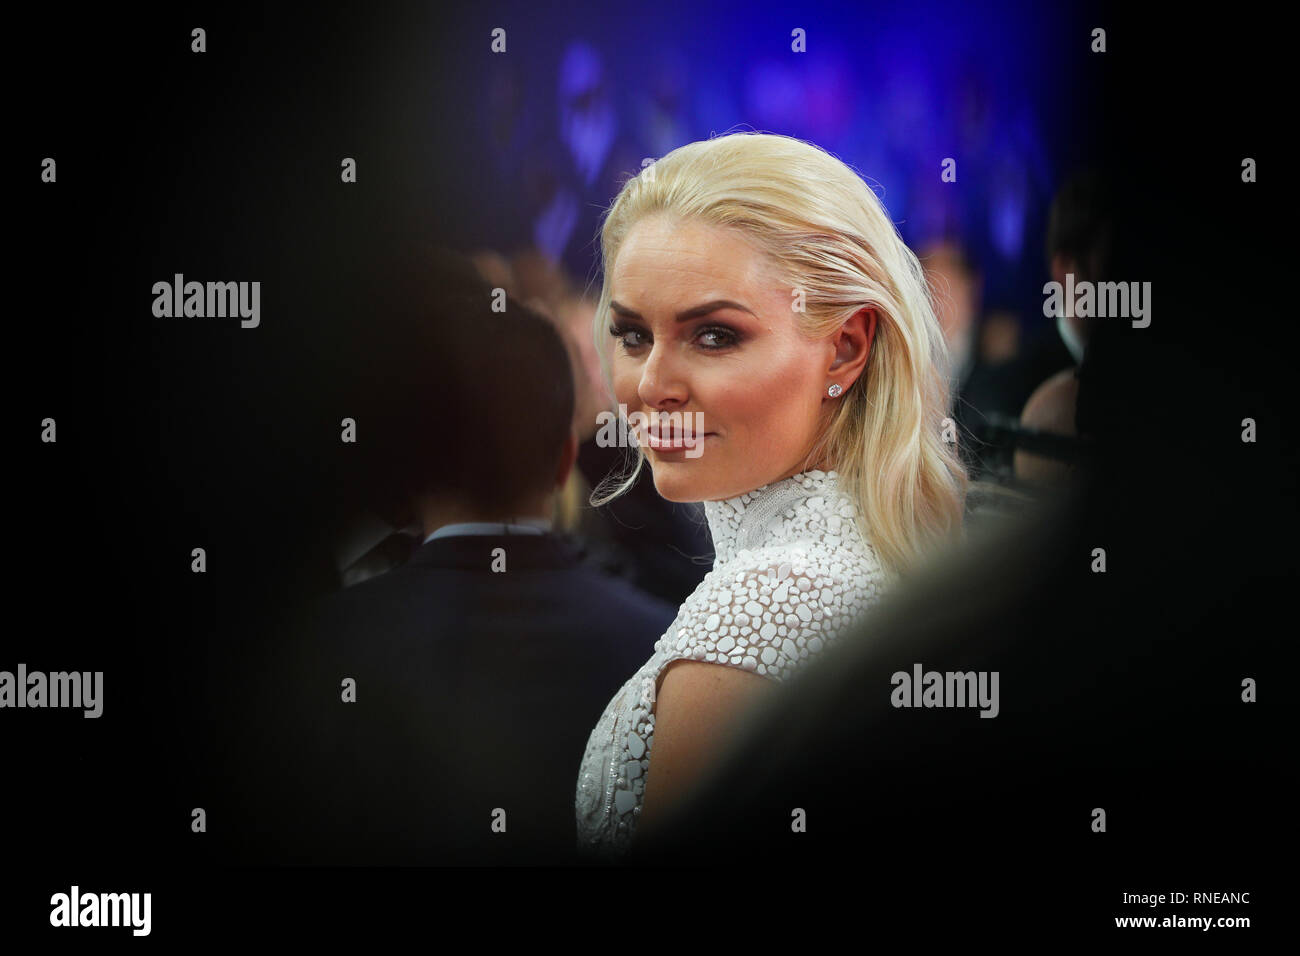 Monaco. 18th Feb, 2019. American former World Cup alpine ski racer Lindsey Vonn poses on the red carpet at the 2019 Laureus World Sports Awards ceremony in Monaco, Feb. 18, 2019. The 2019 Laureus World Sports Awards were unveiled in Monaco on Monday. Credit: Zheng Huansong/Xinhua/Alamy Live News Stock Photo